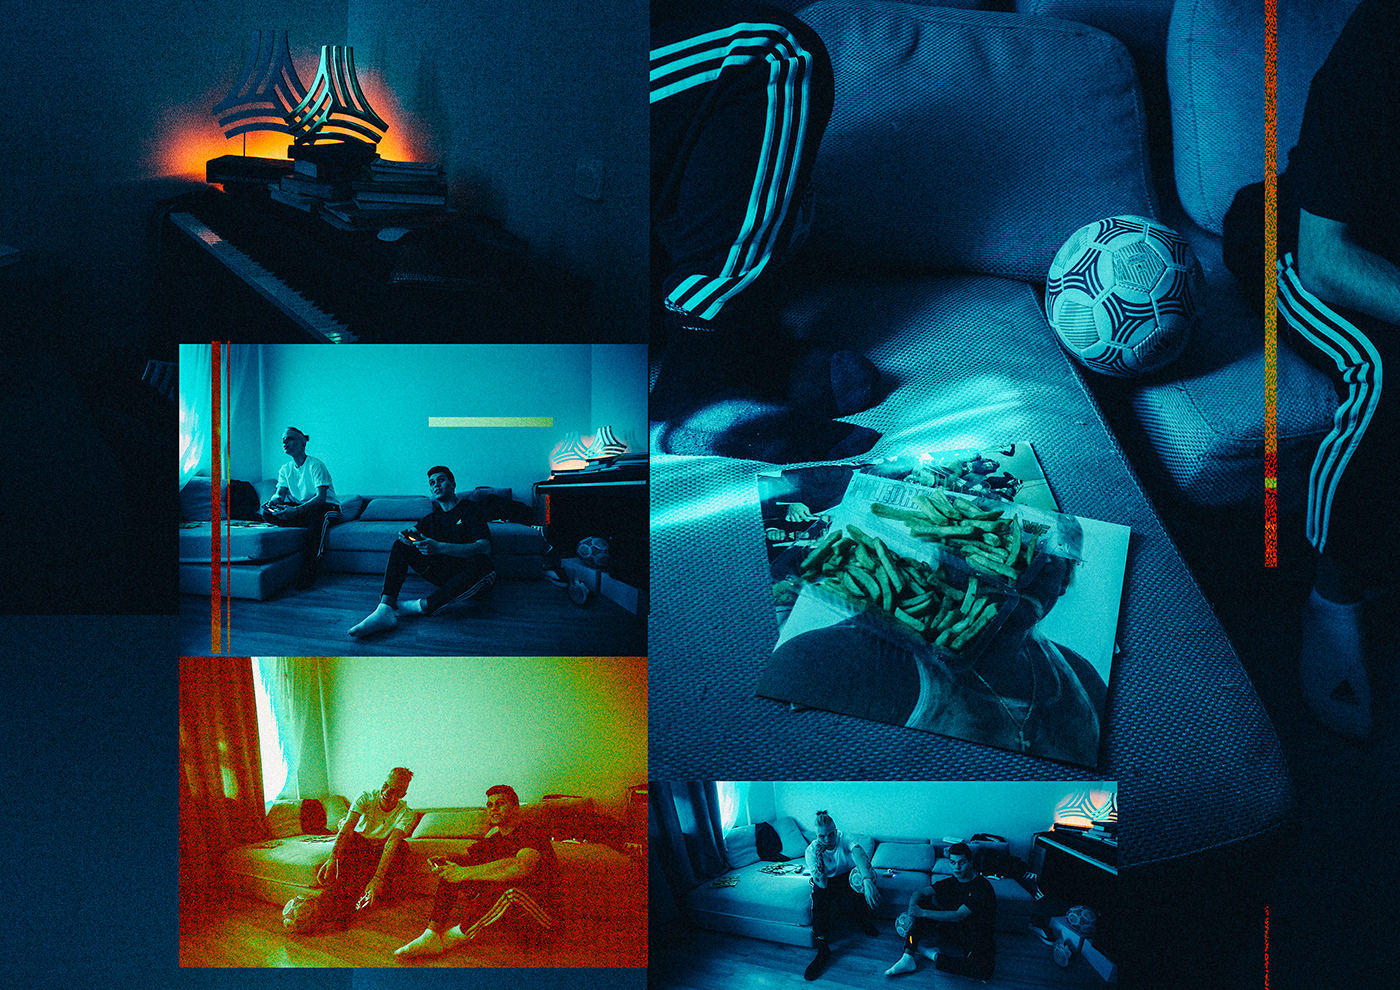 pharaoh rapper adidas football Layout collage glitche soccer campaign sport